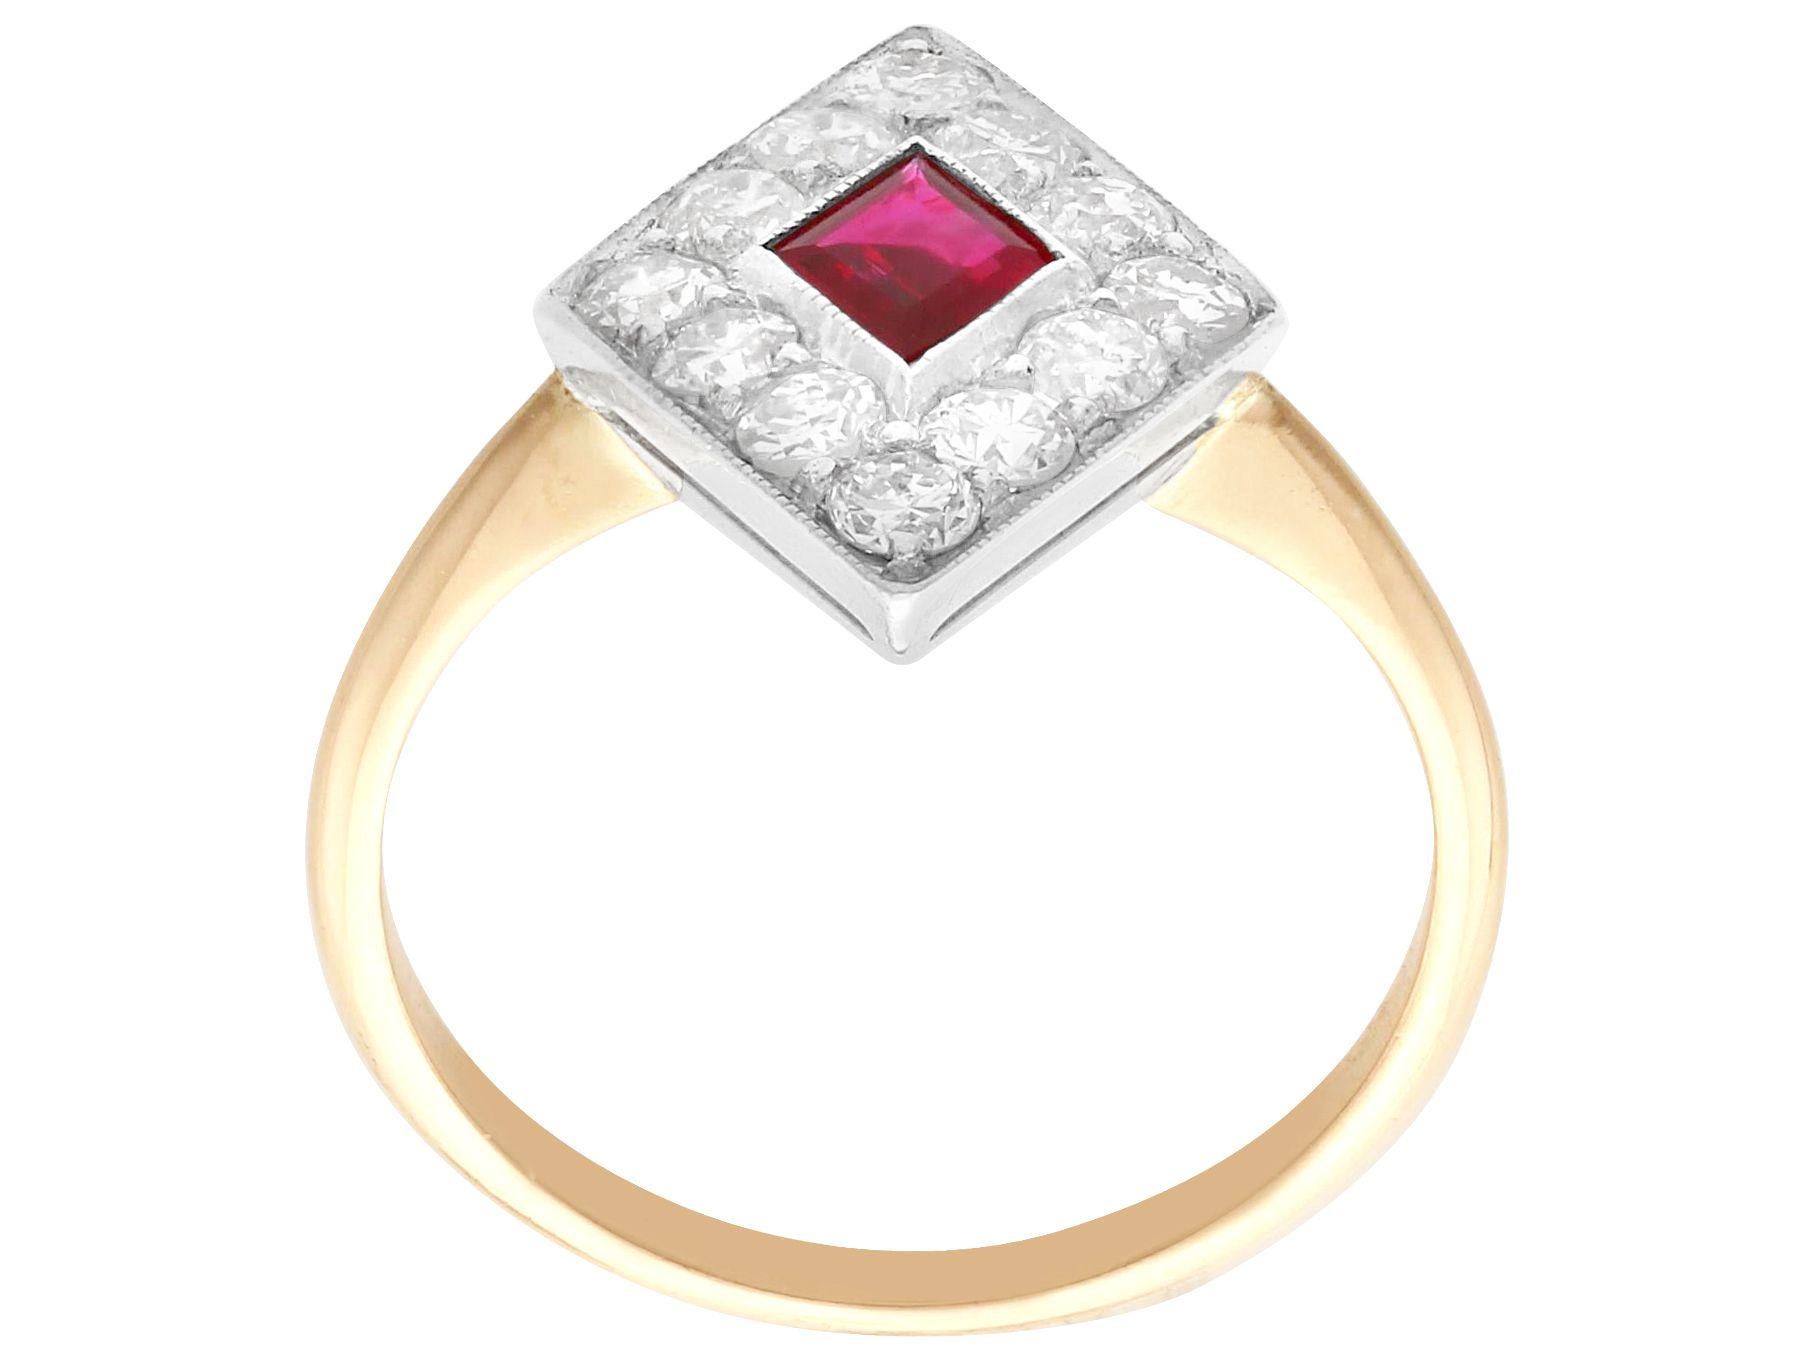 Kite Cut Antique 0.39ct Ruby and 0.63ct Diamond 15k Yellow Gold Dress Ring, circa 1920 For Sale